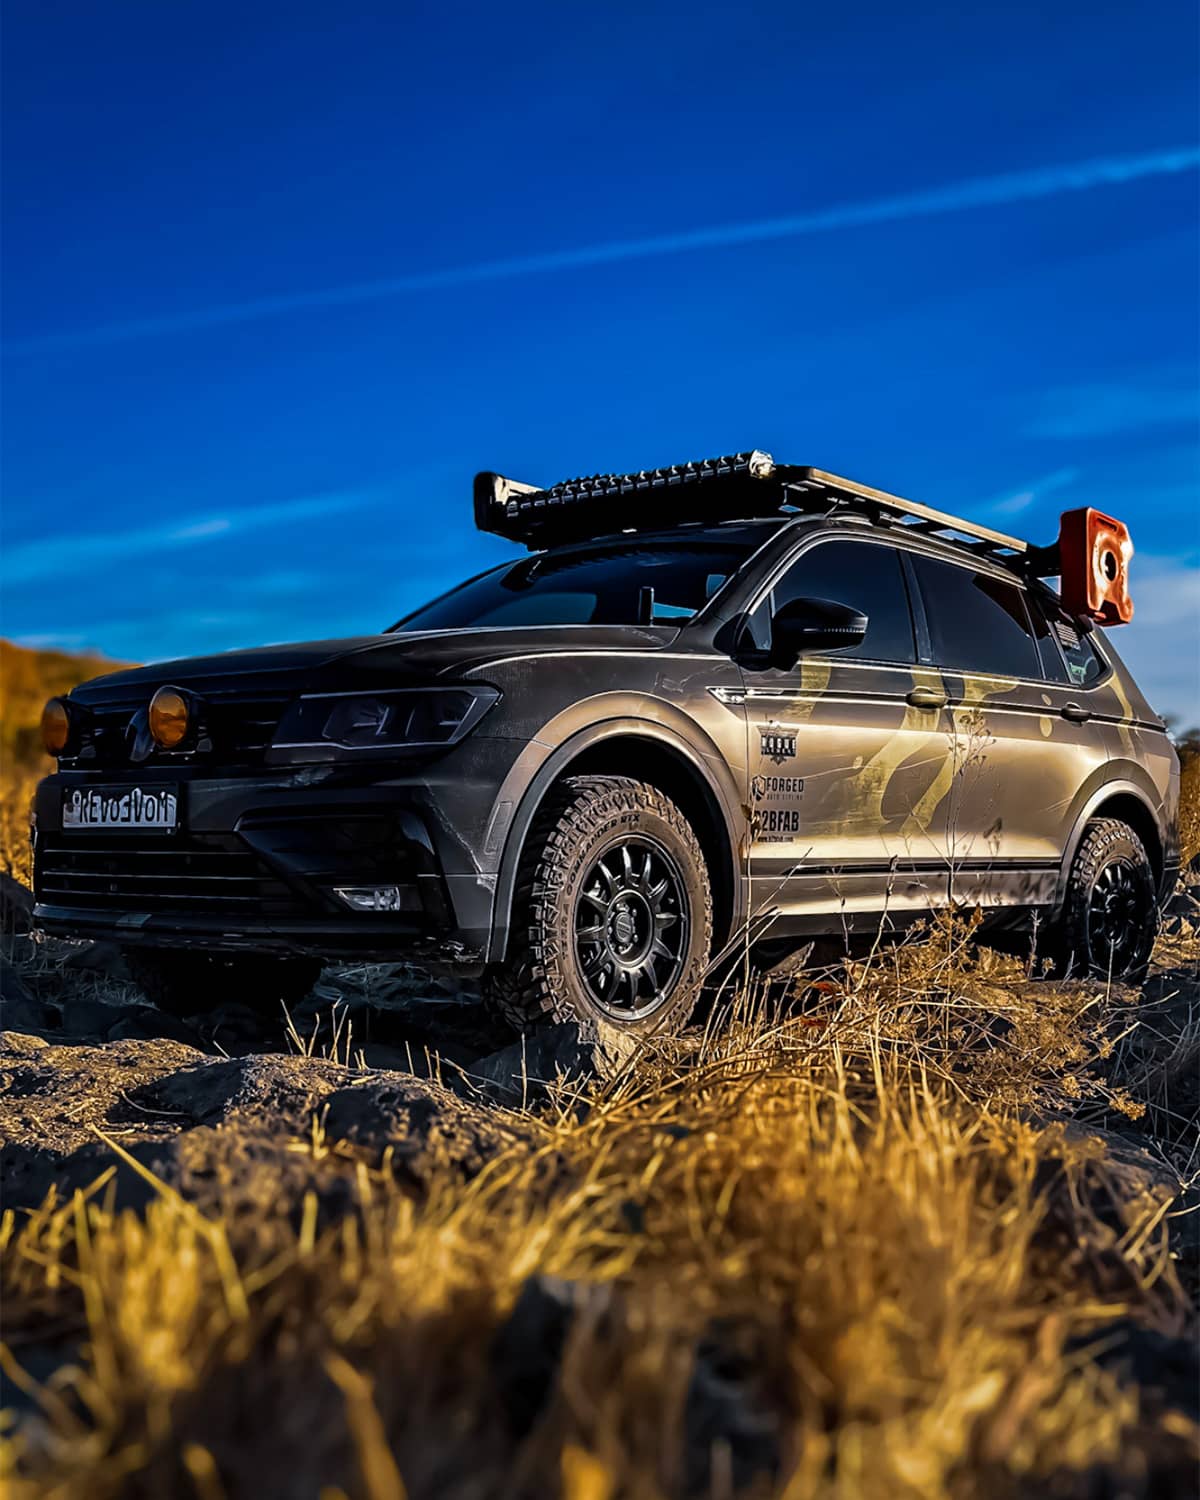 VW Tiguan Roof Rack with LED light bar and off road mods